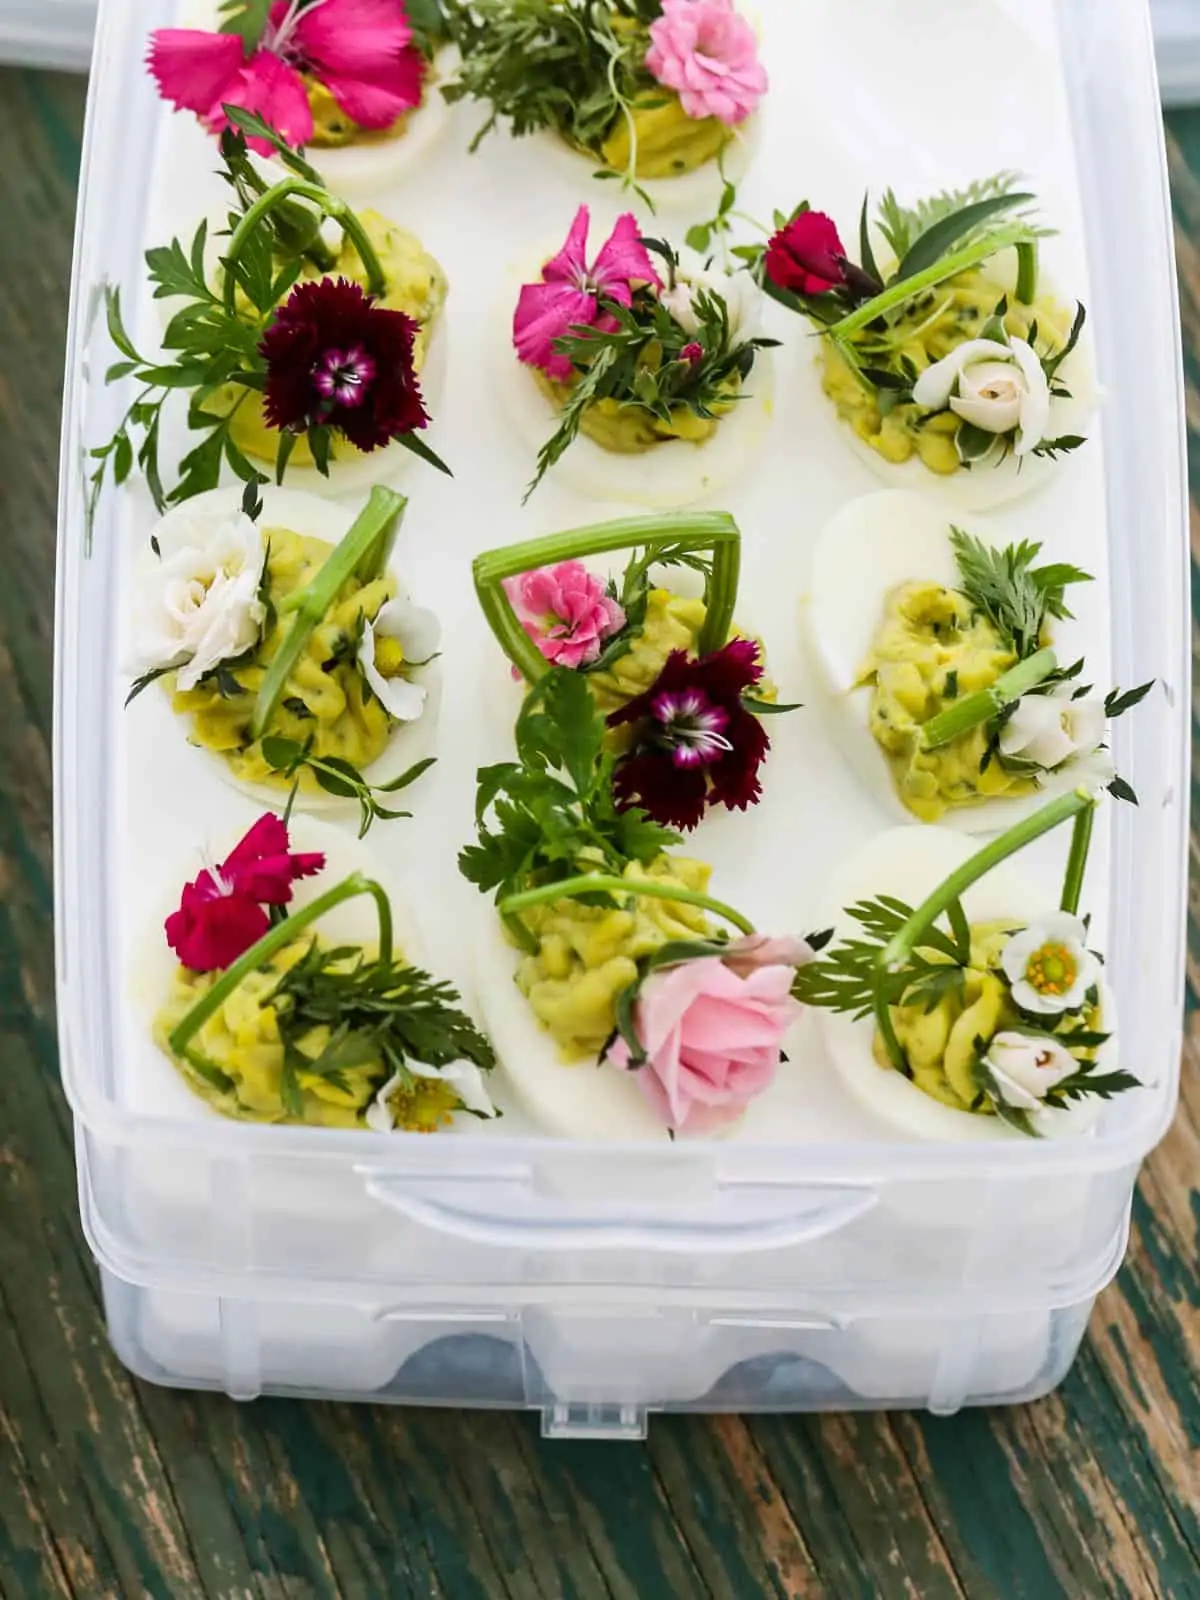 A plastic box designed to carry deviled eggs filled with Easter deviled eggs to take to a party.